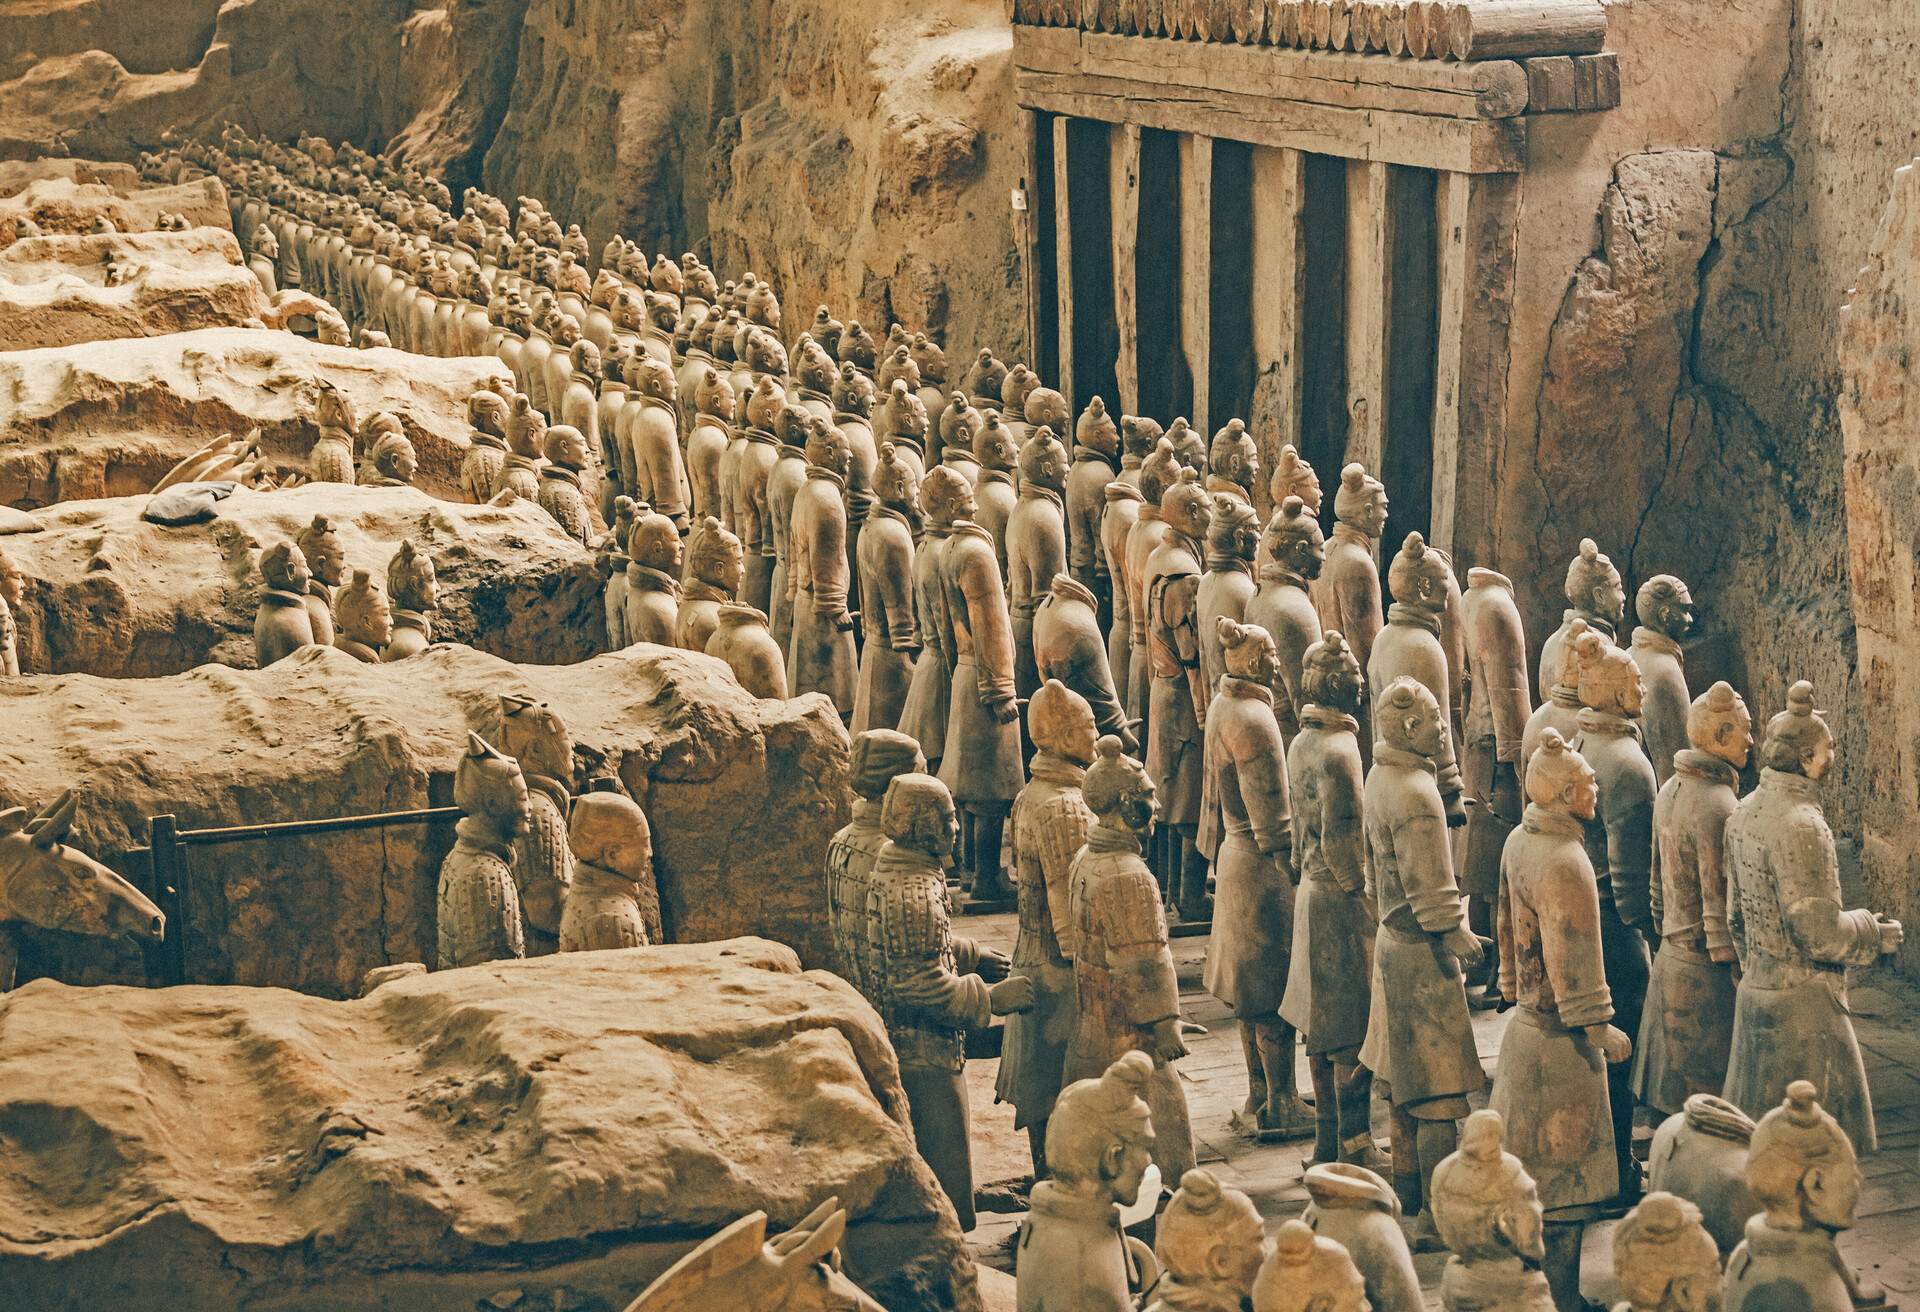 The Terracotta Army statues with chariots and horses behind them.